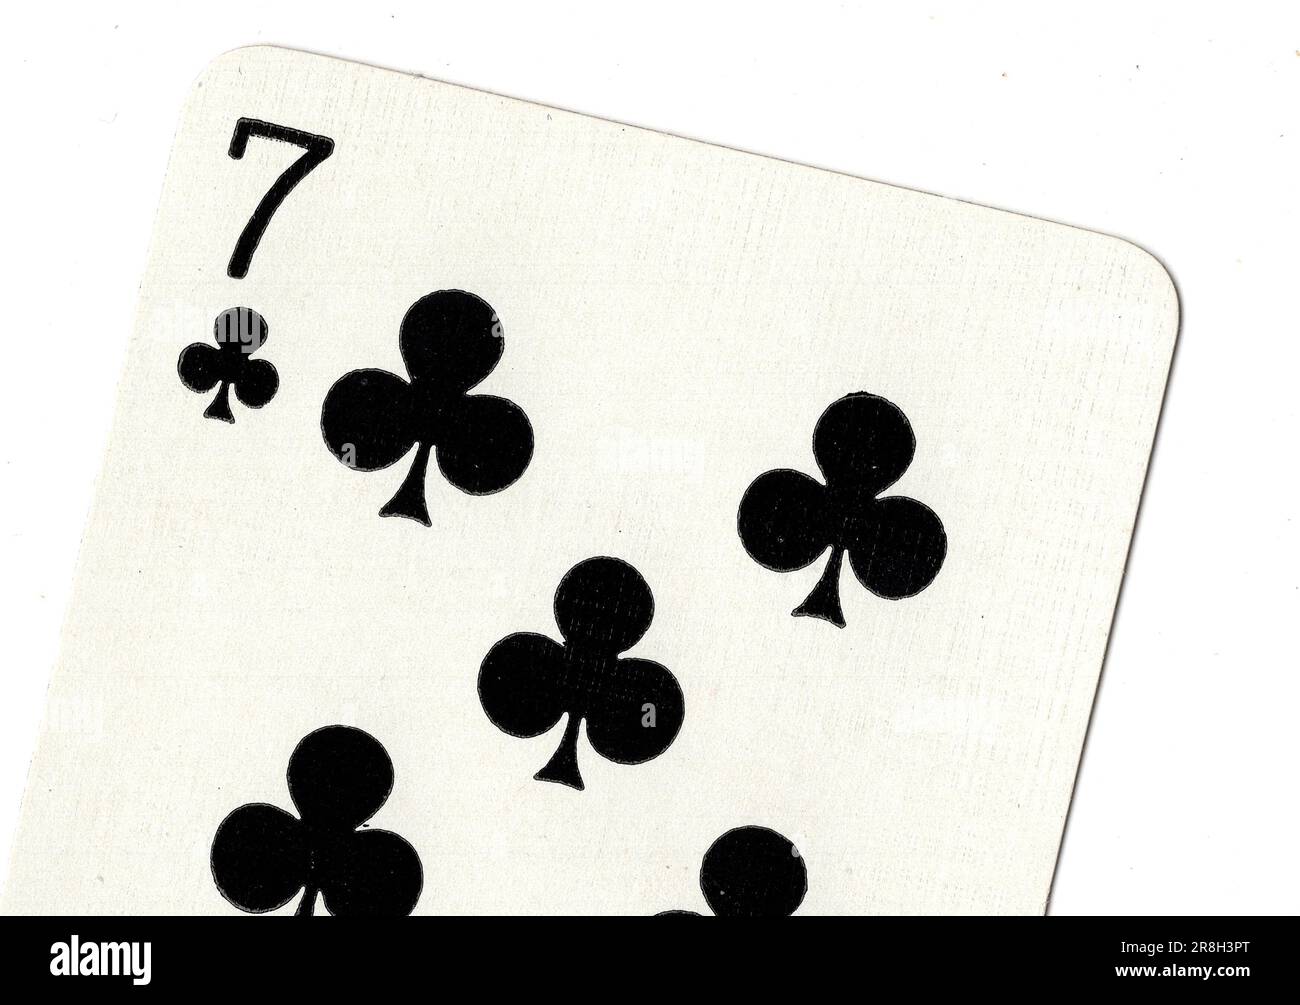 A seven of clubs vintage playing card on a white background. Stock Photo